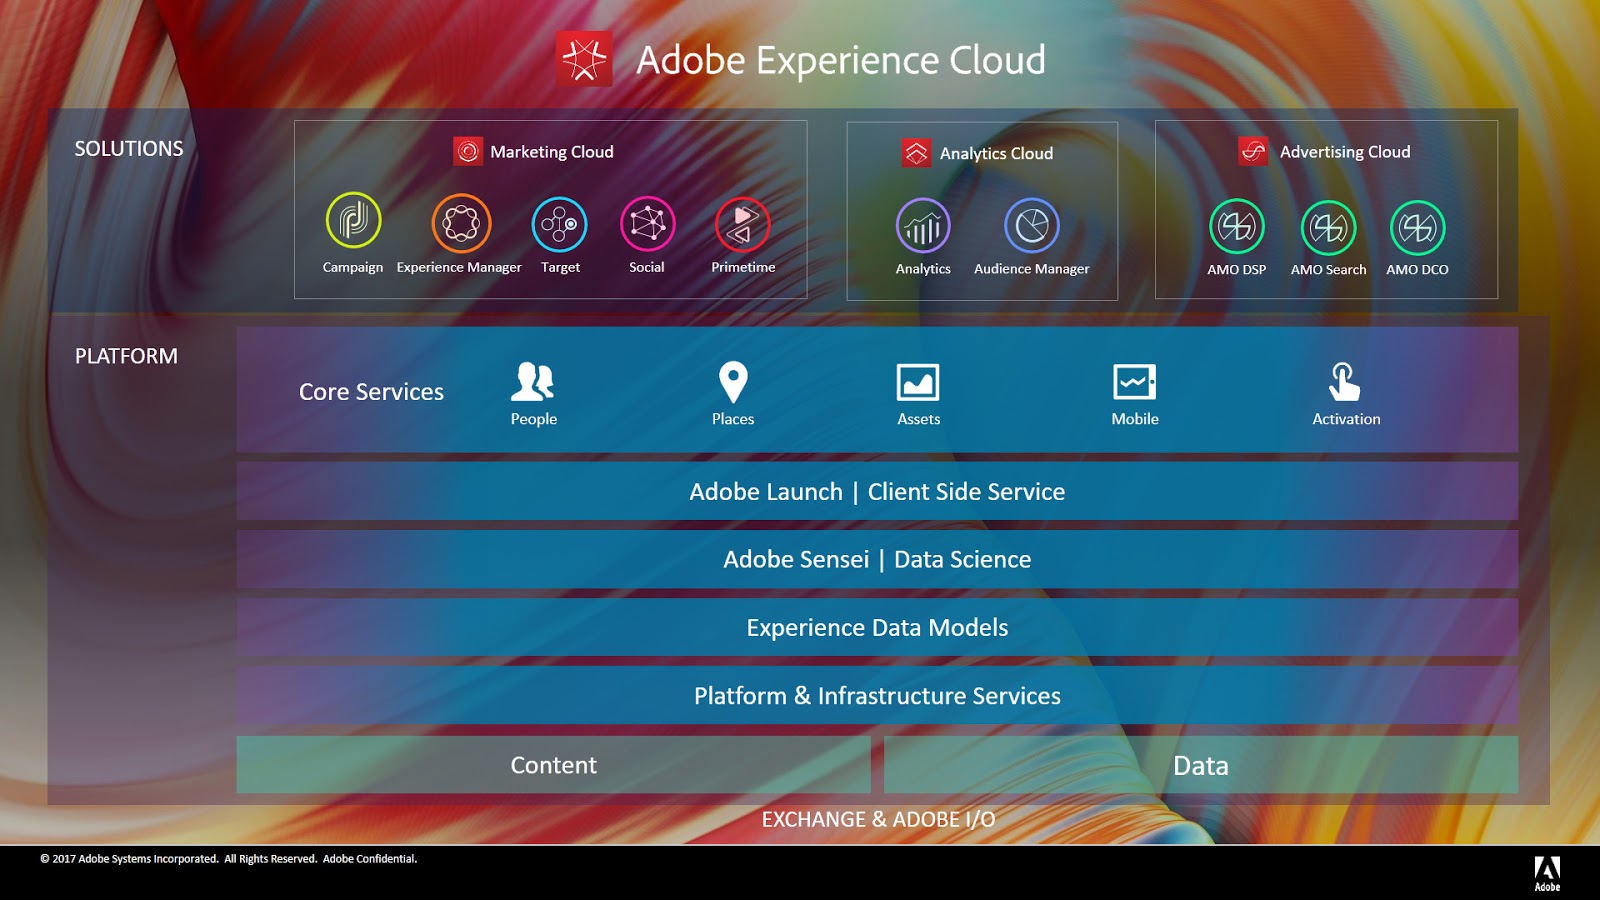 Adobe experience cloud. Adobe experience Manager. Adobe и Microsoft. Adobe experience Manager когда появился. Launch client